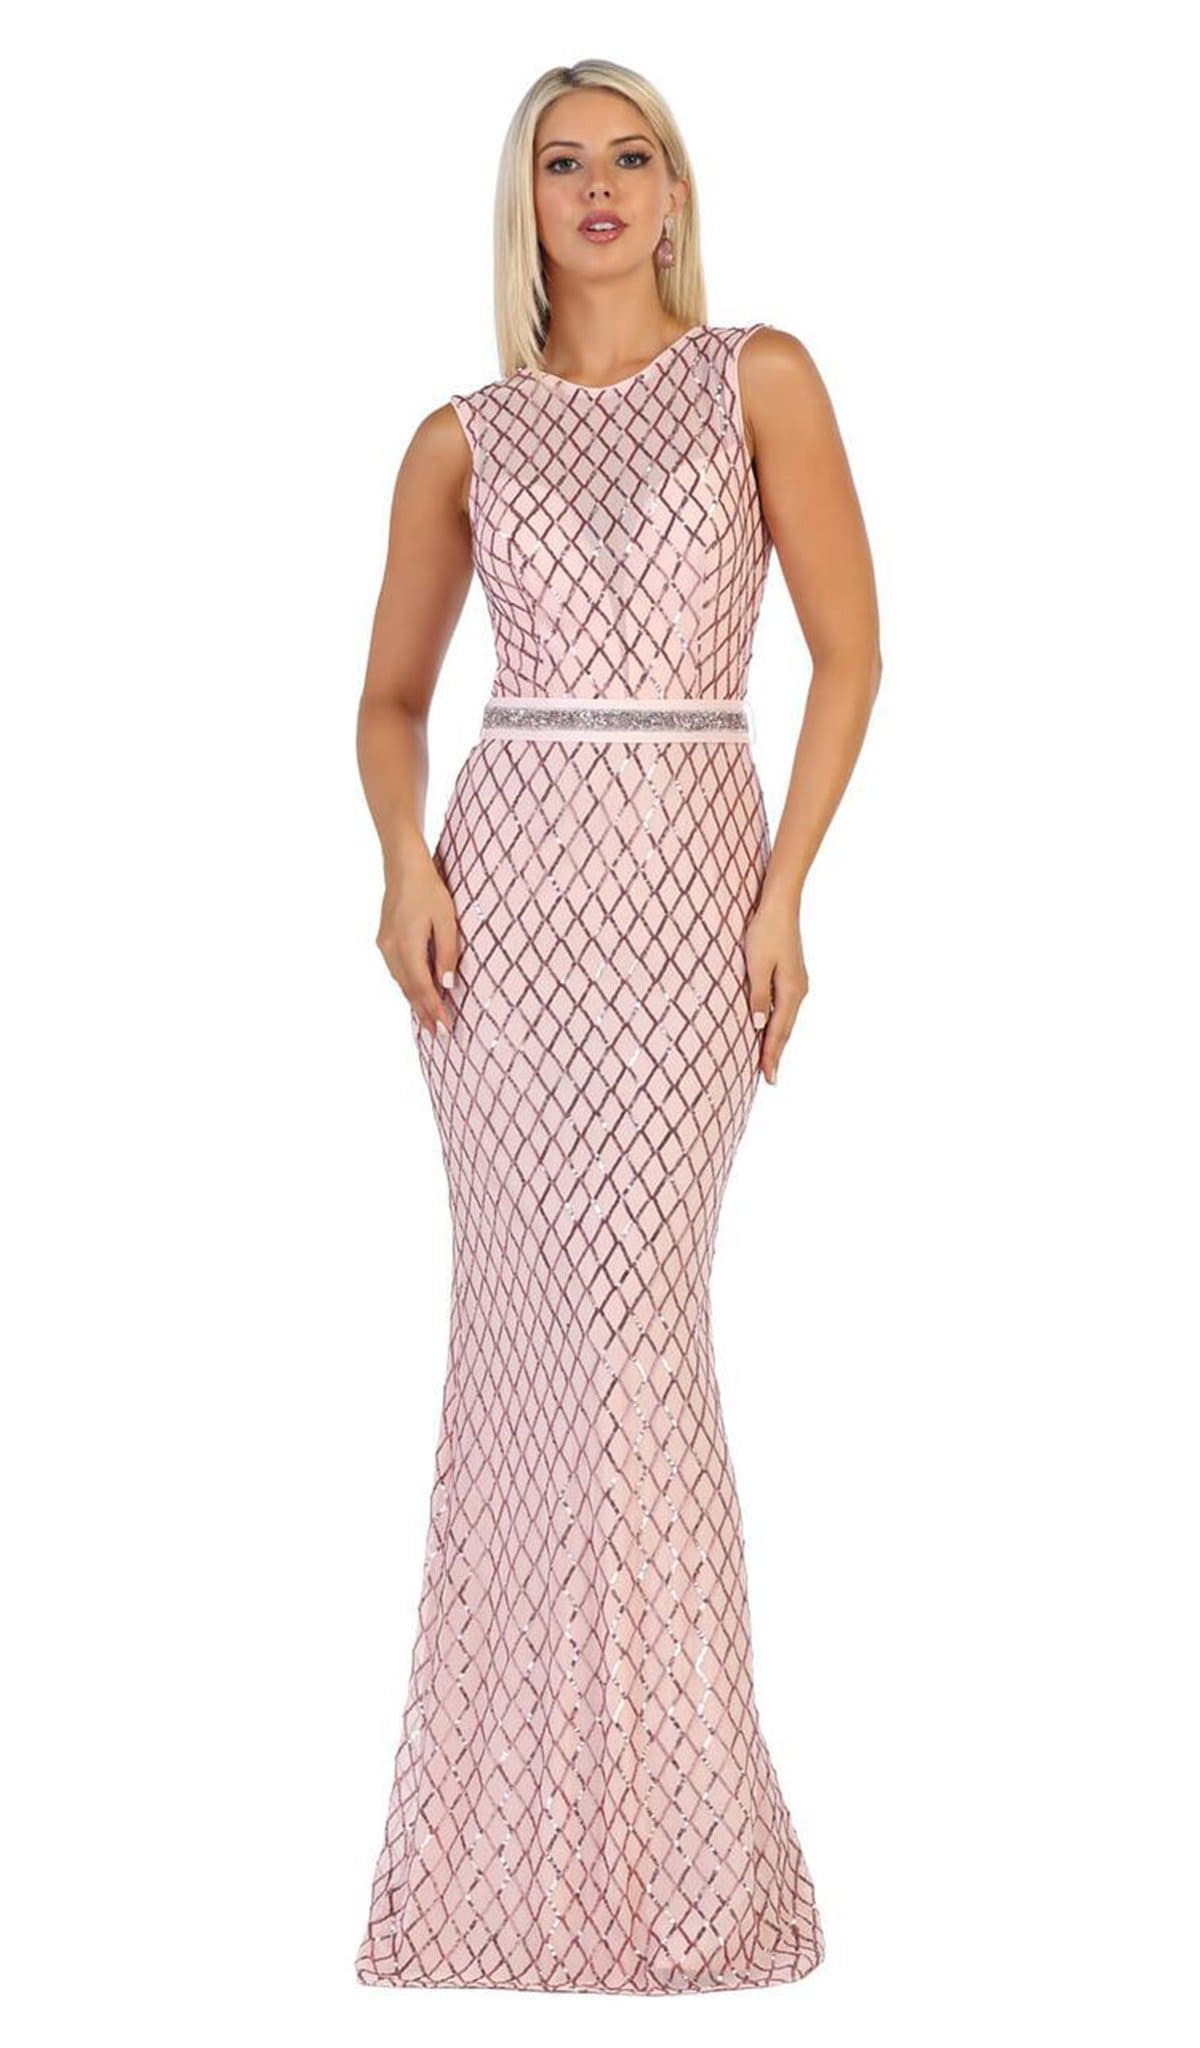 May Queen - MQ1606 Sequined Lattice Sheer Sheath Gown
